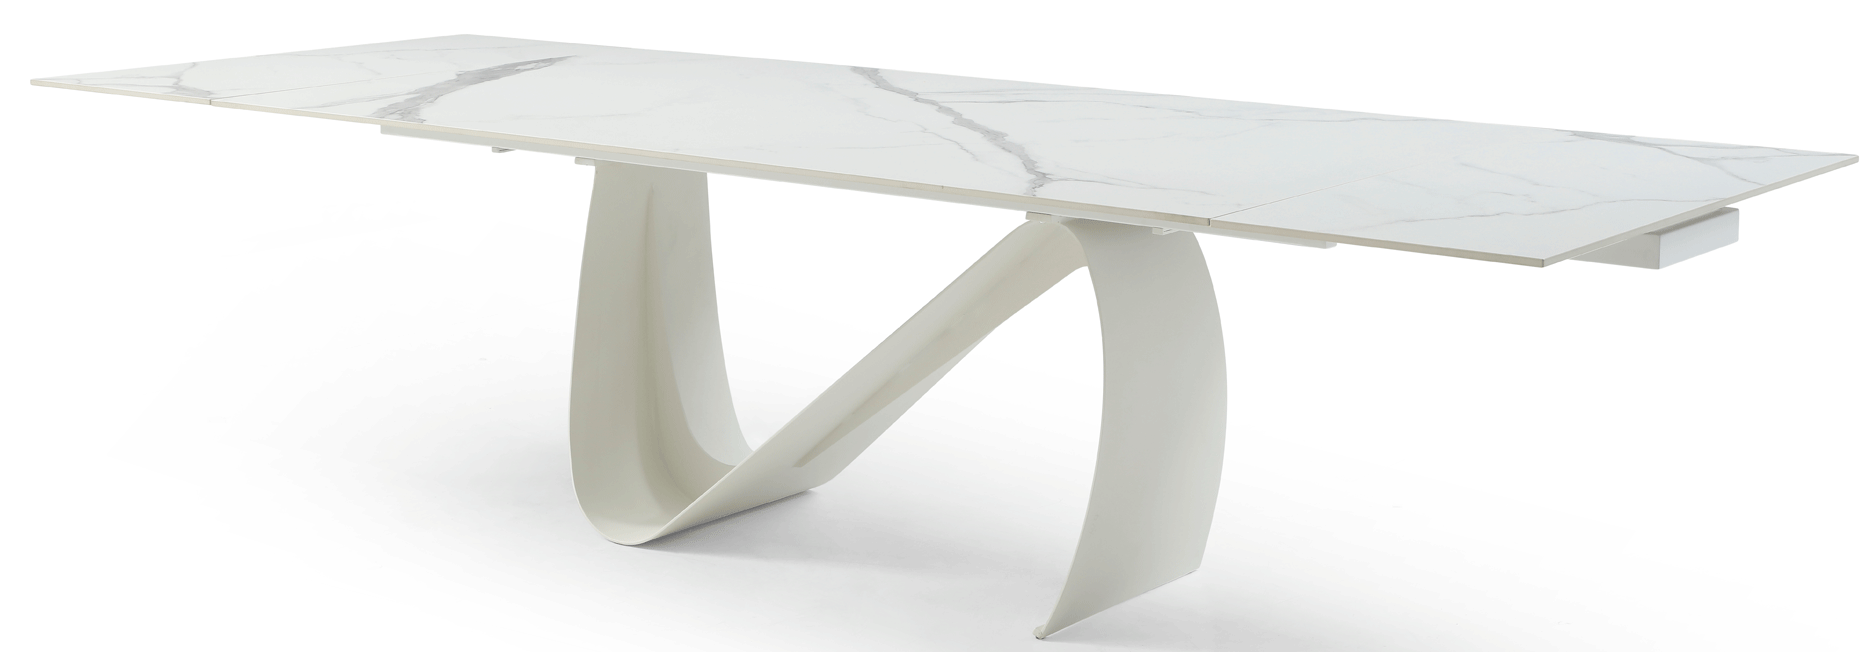 ESF Extravaganza Collection 9087 Dining Table White i37518